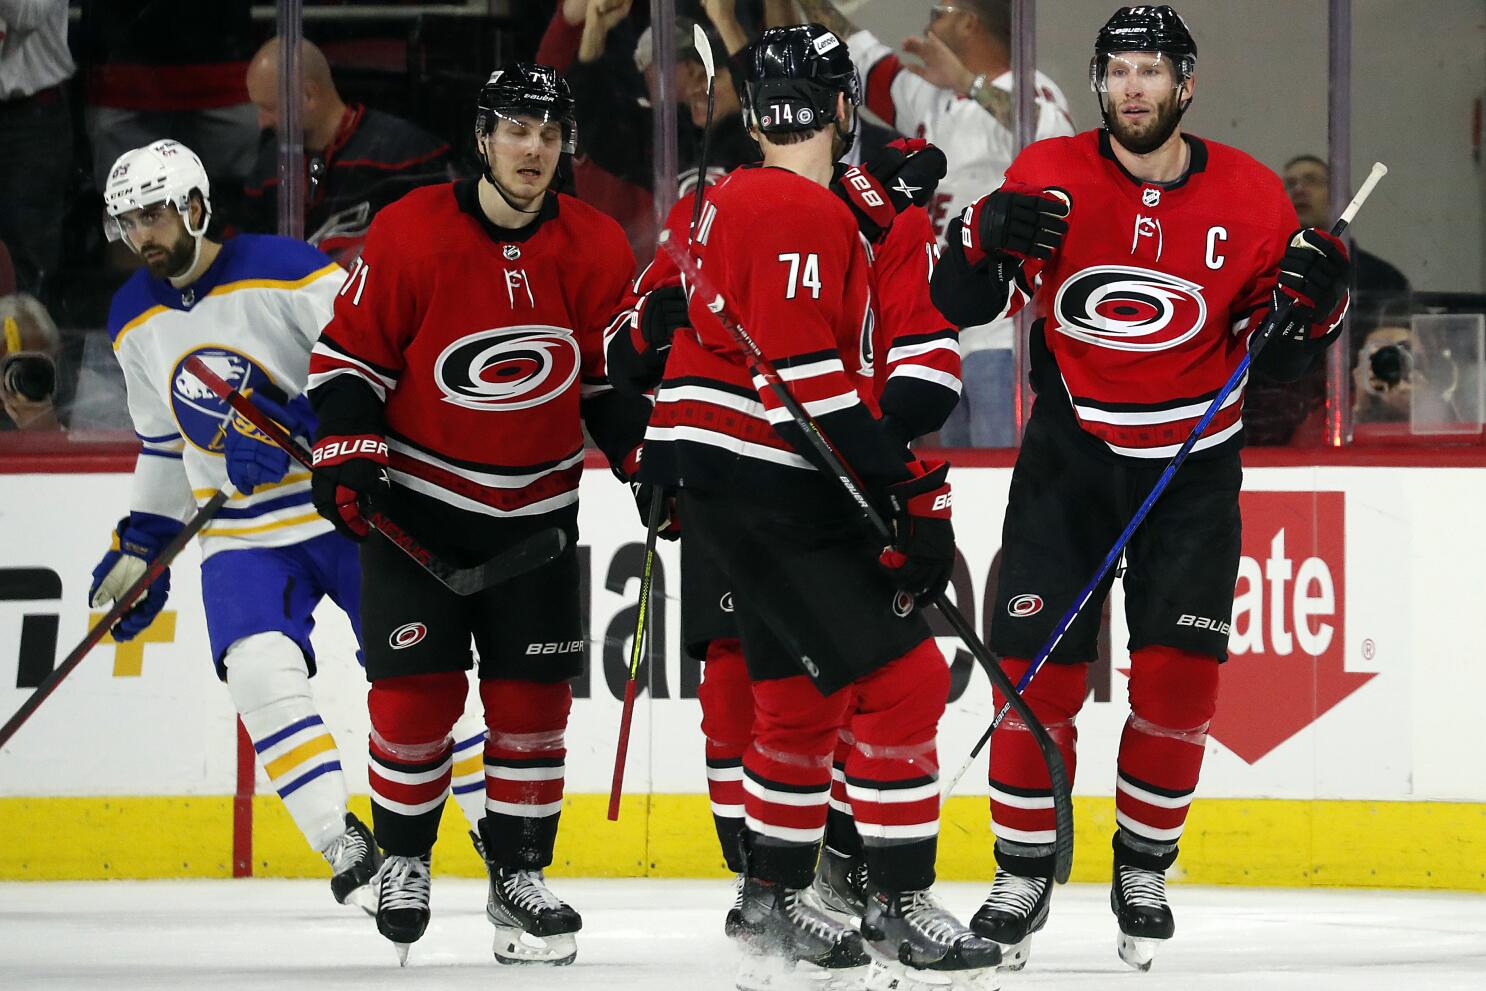 Devils rally from two goals down to beat Rangers 5-3 - Seattle Sports